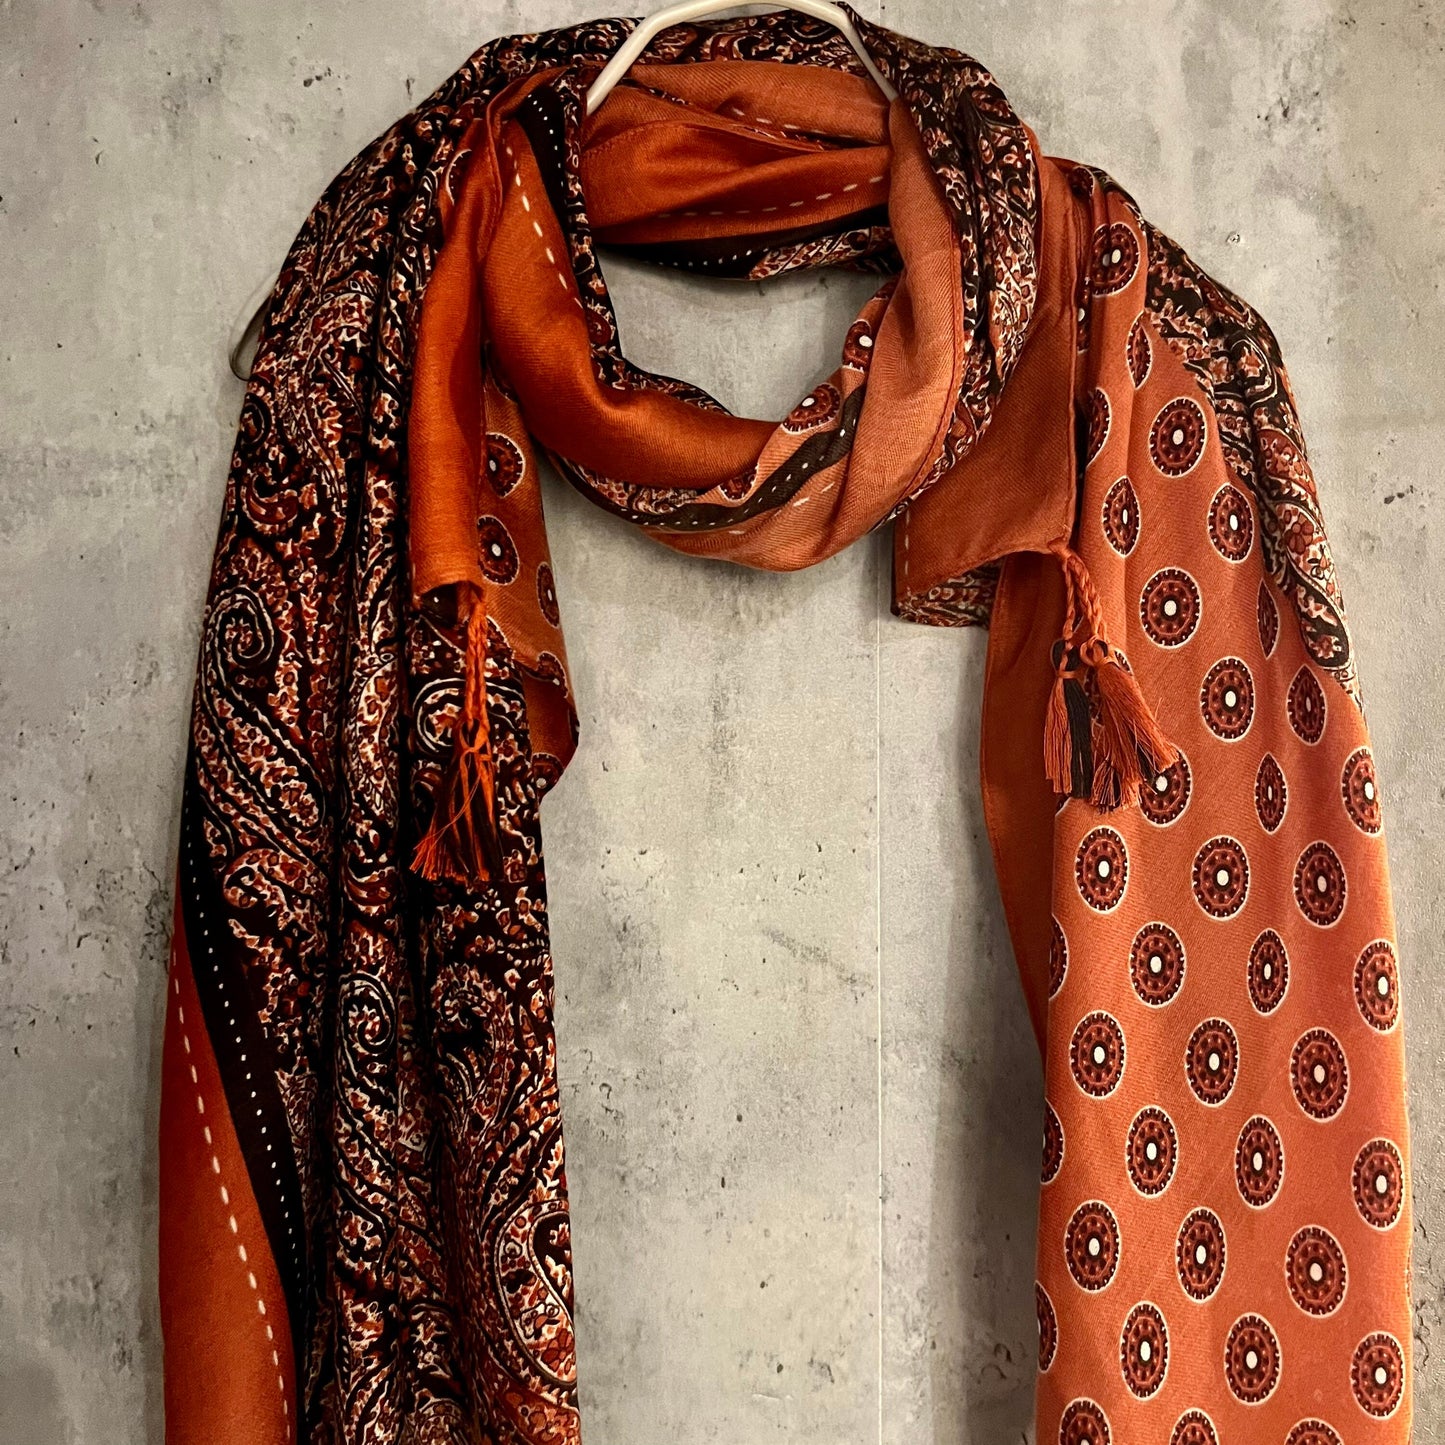 Modern Paisley With Tassels Orange Cotton Scarf/Summer Autumn Winter Scarf/Gifts For Mum/Gifts For Her Birthday Christmas/UK Seller